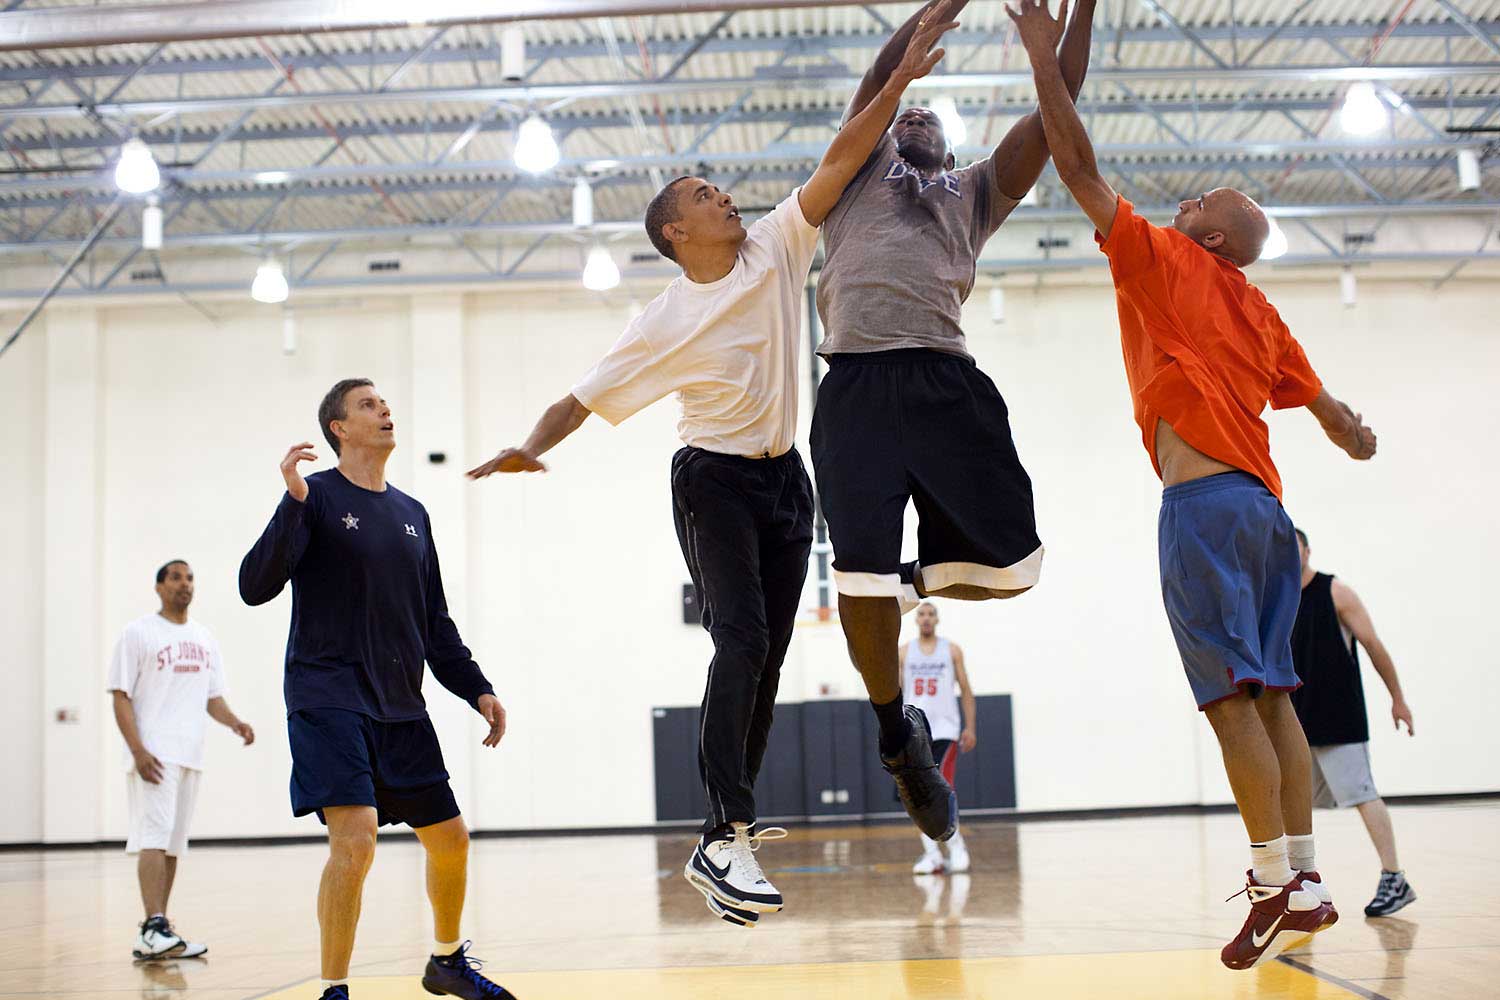 President Obama tries to block a layup shot by his former personal aide, Reggie Love, at Fort McNair in Washington, D.C., May 16, 2010.